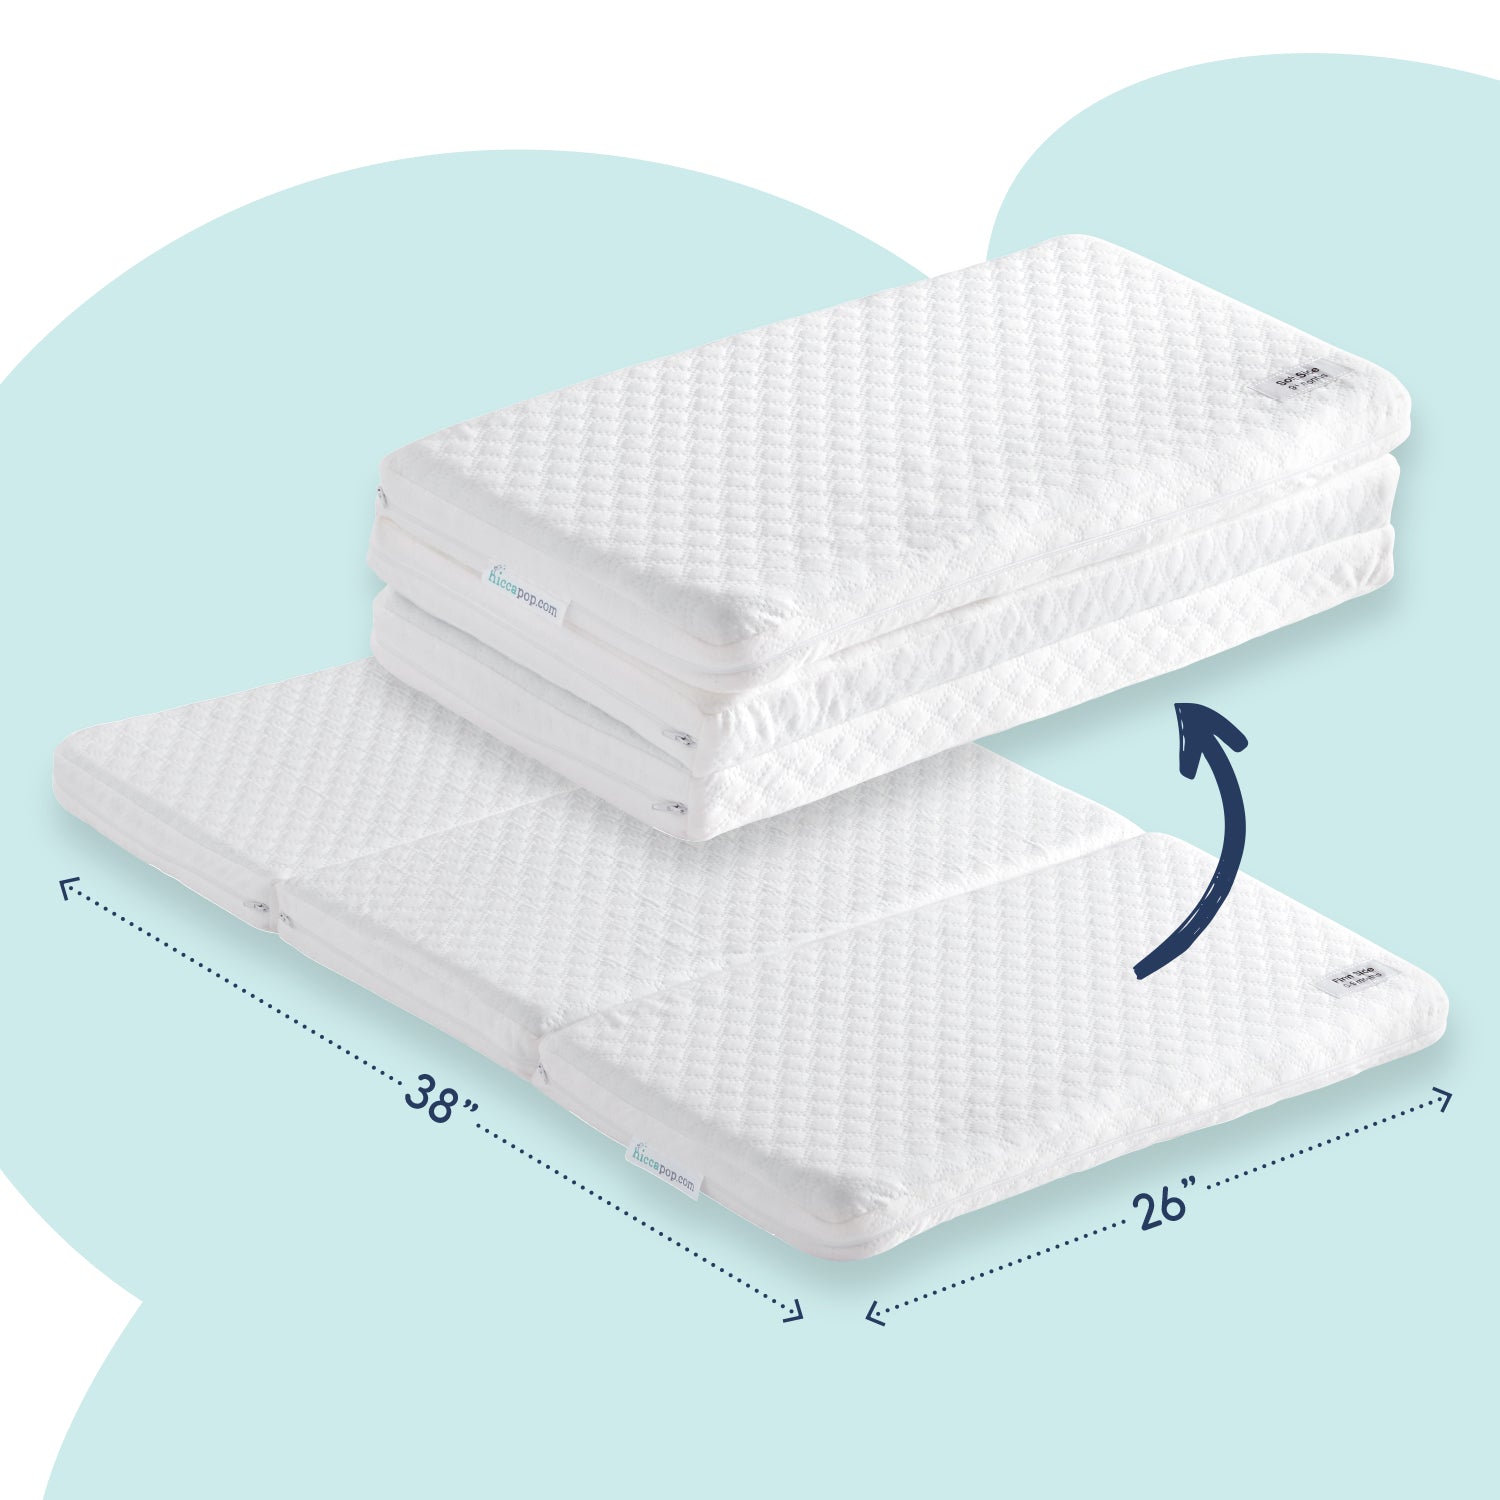 pack and play travel mattress